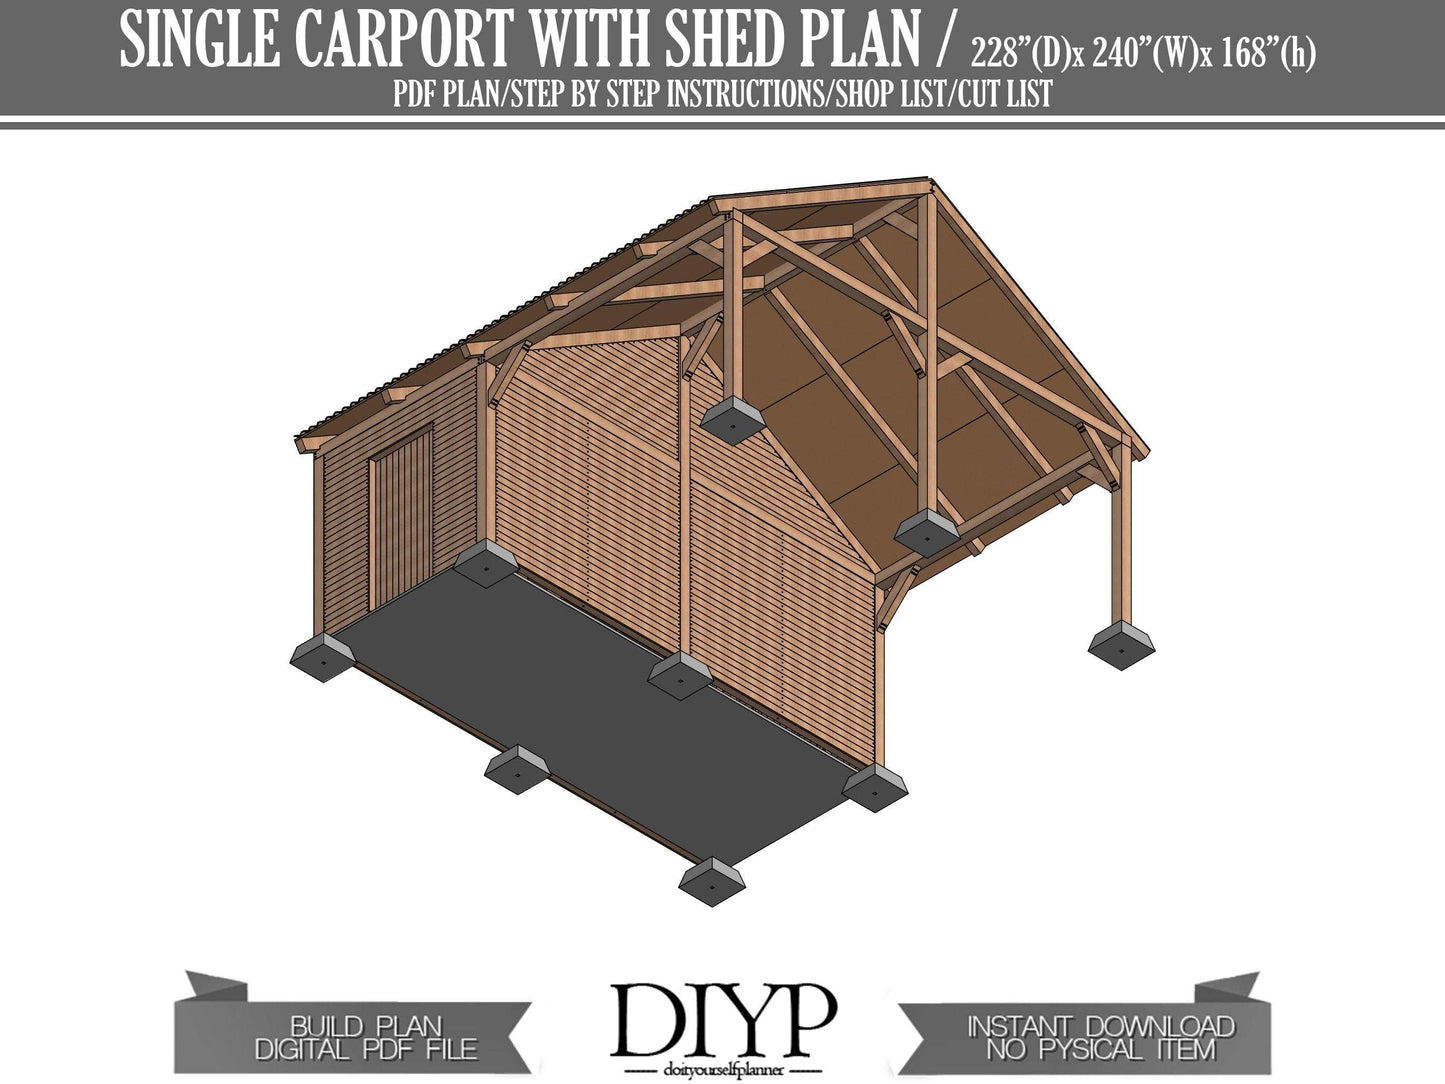 single carport with storage shed - How to  build a carport - diy garage plans